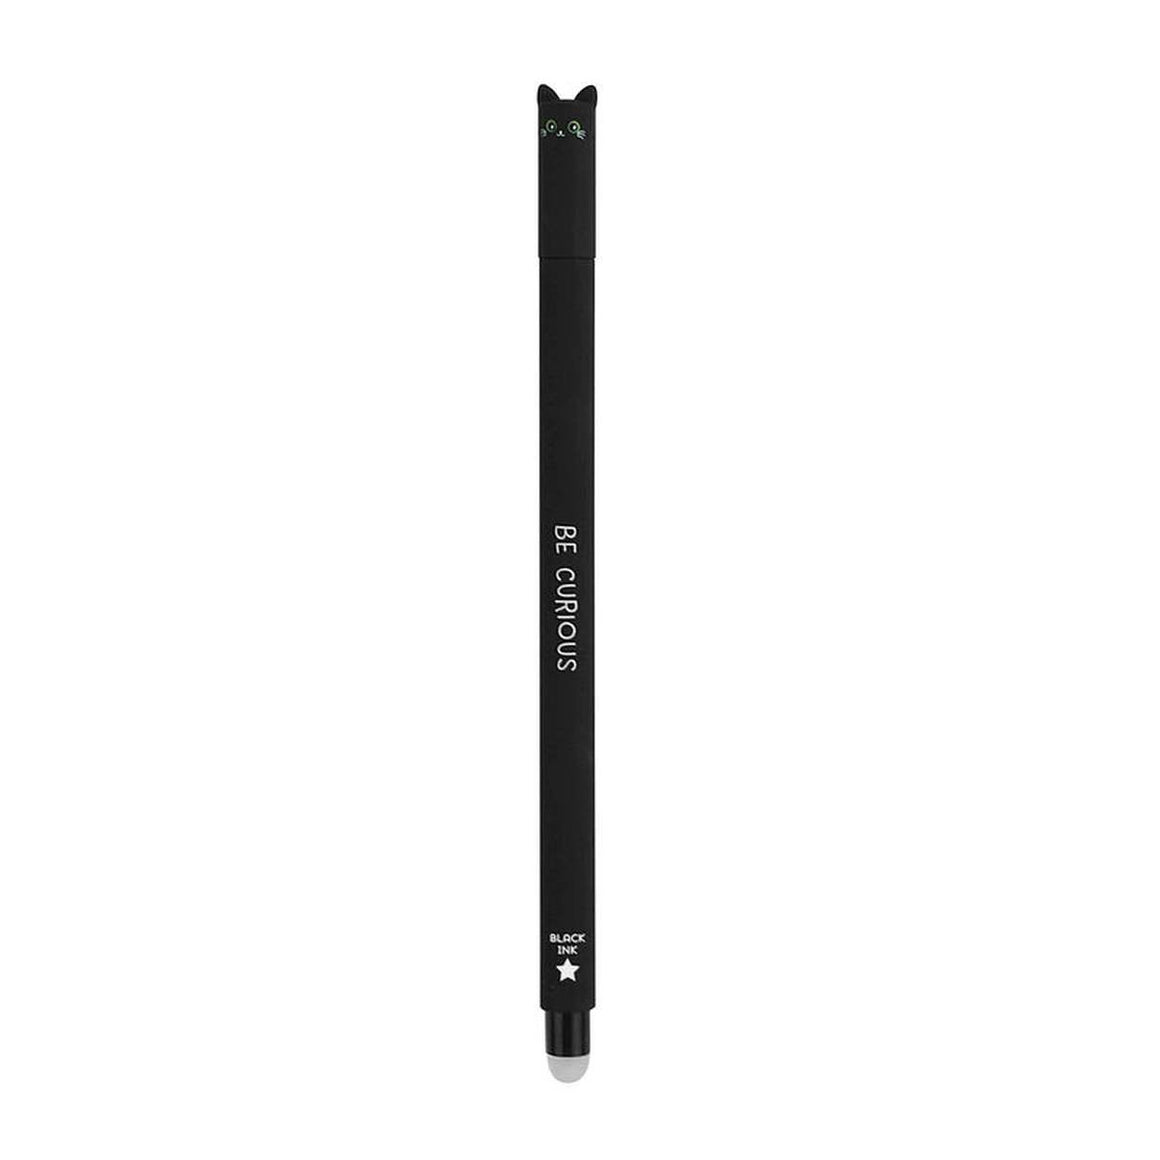 A black slender pen has a round translucent rubber end and a cat face and ears on the tip of the cap.